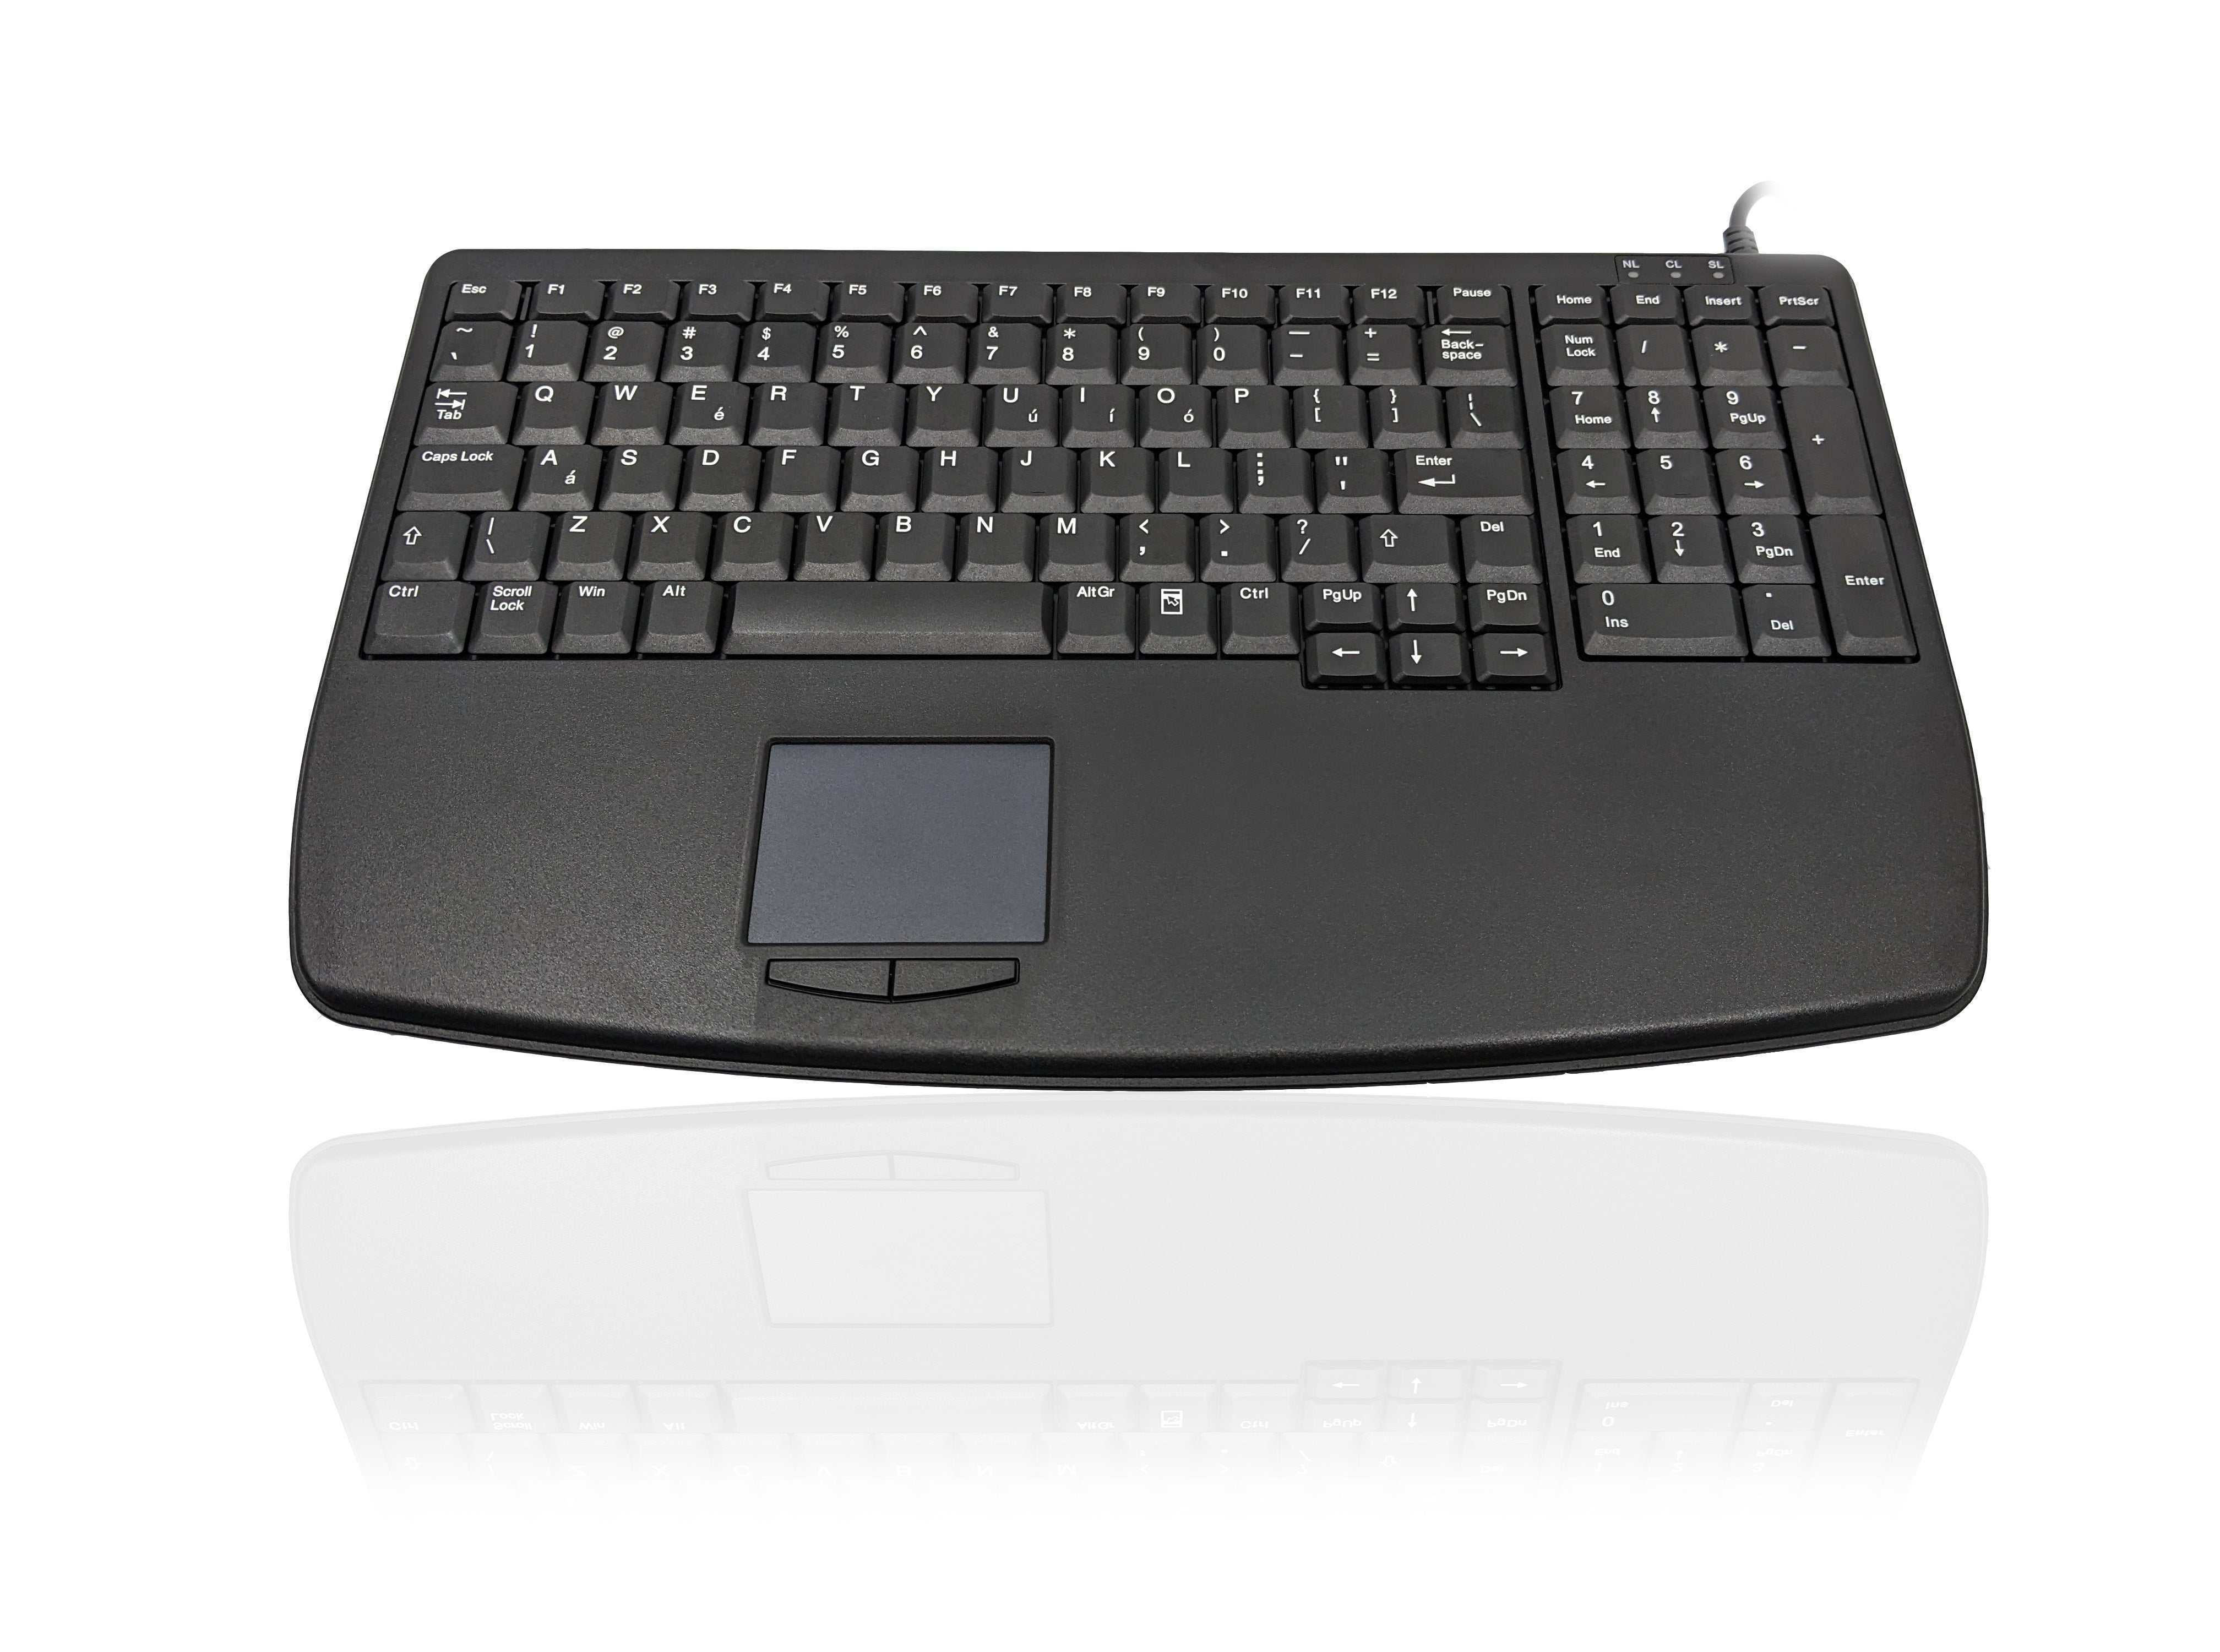 Accuratus 730V2 - USB Compact Scissor Key Keyboard with Numeric Keypad and Touchpad